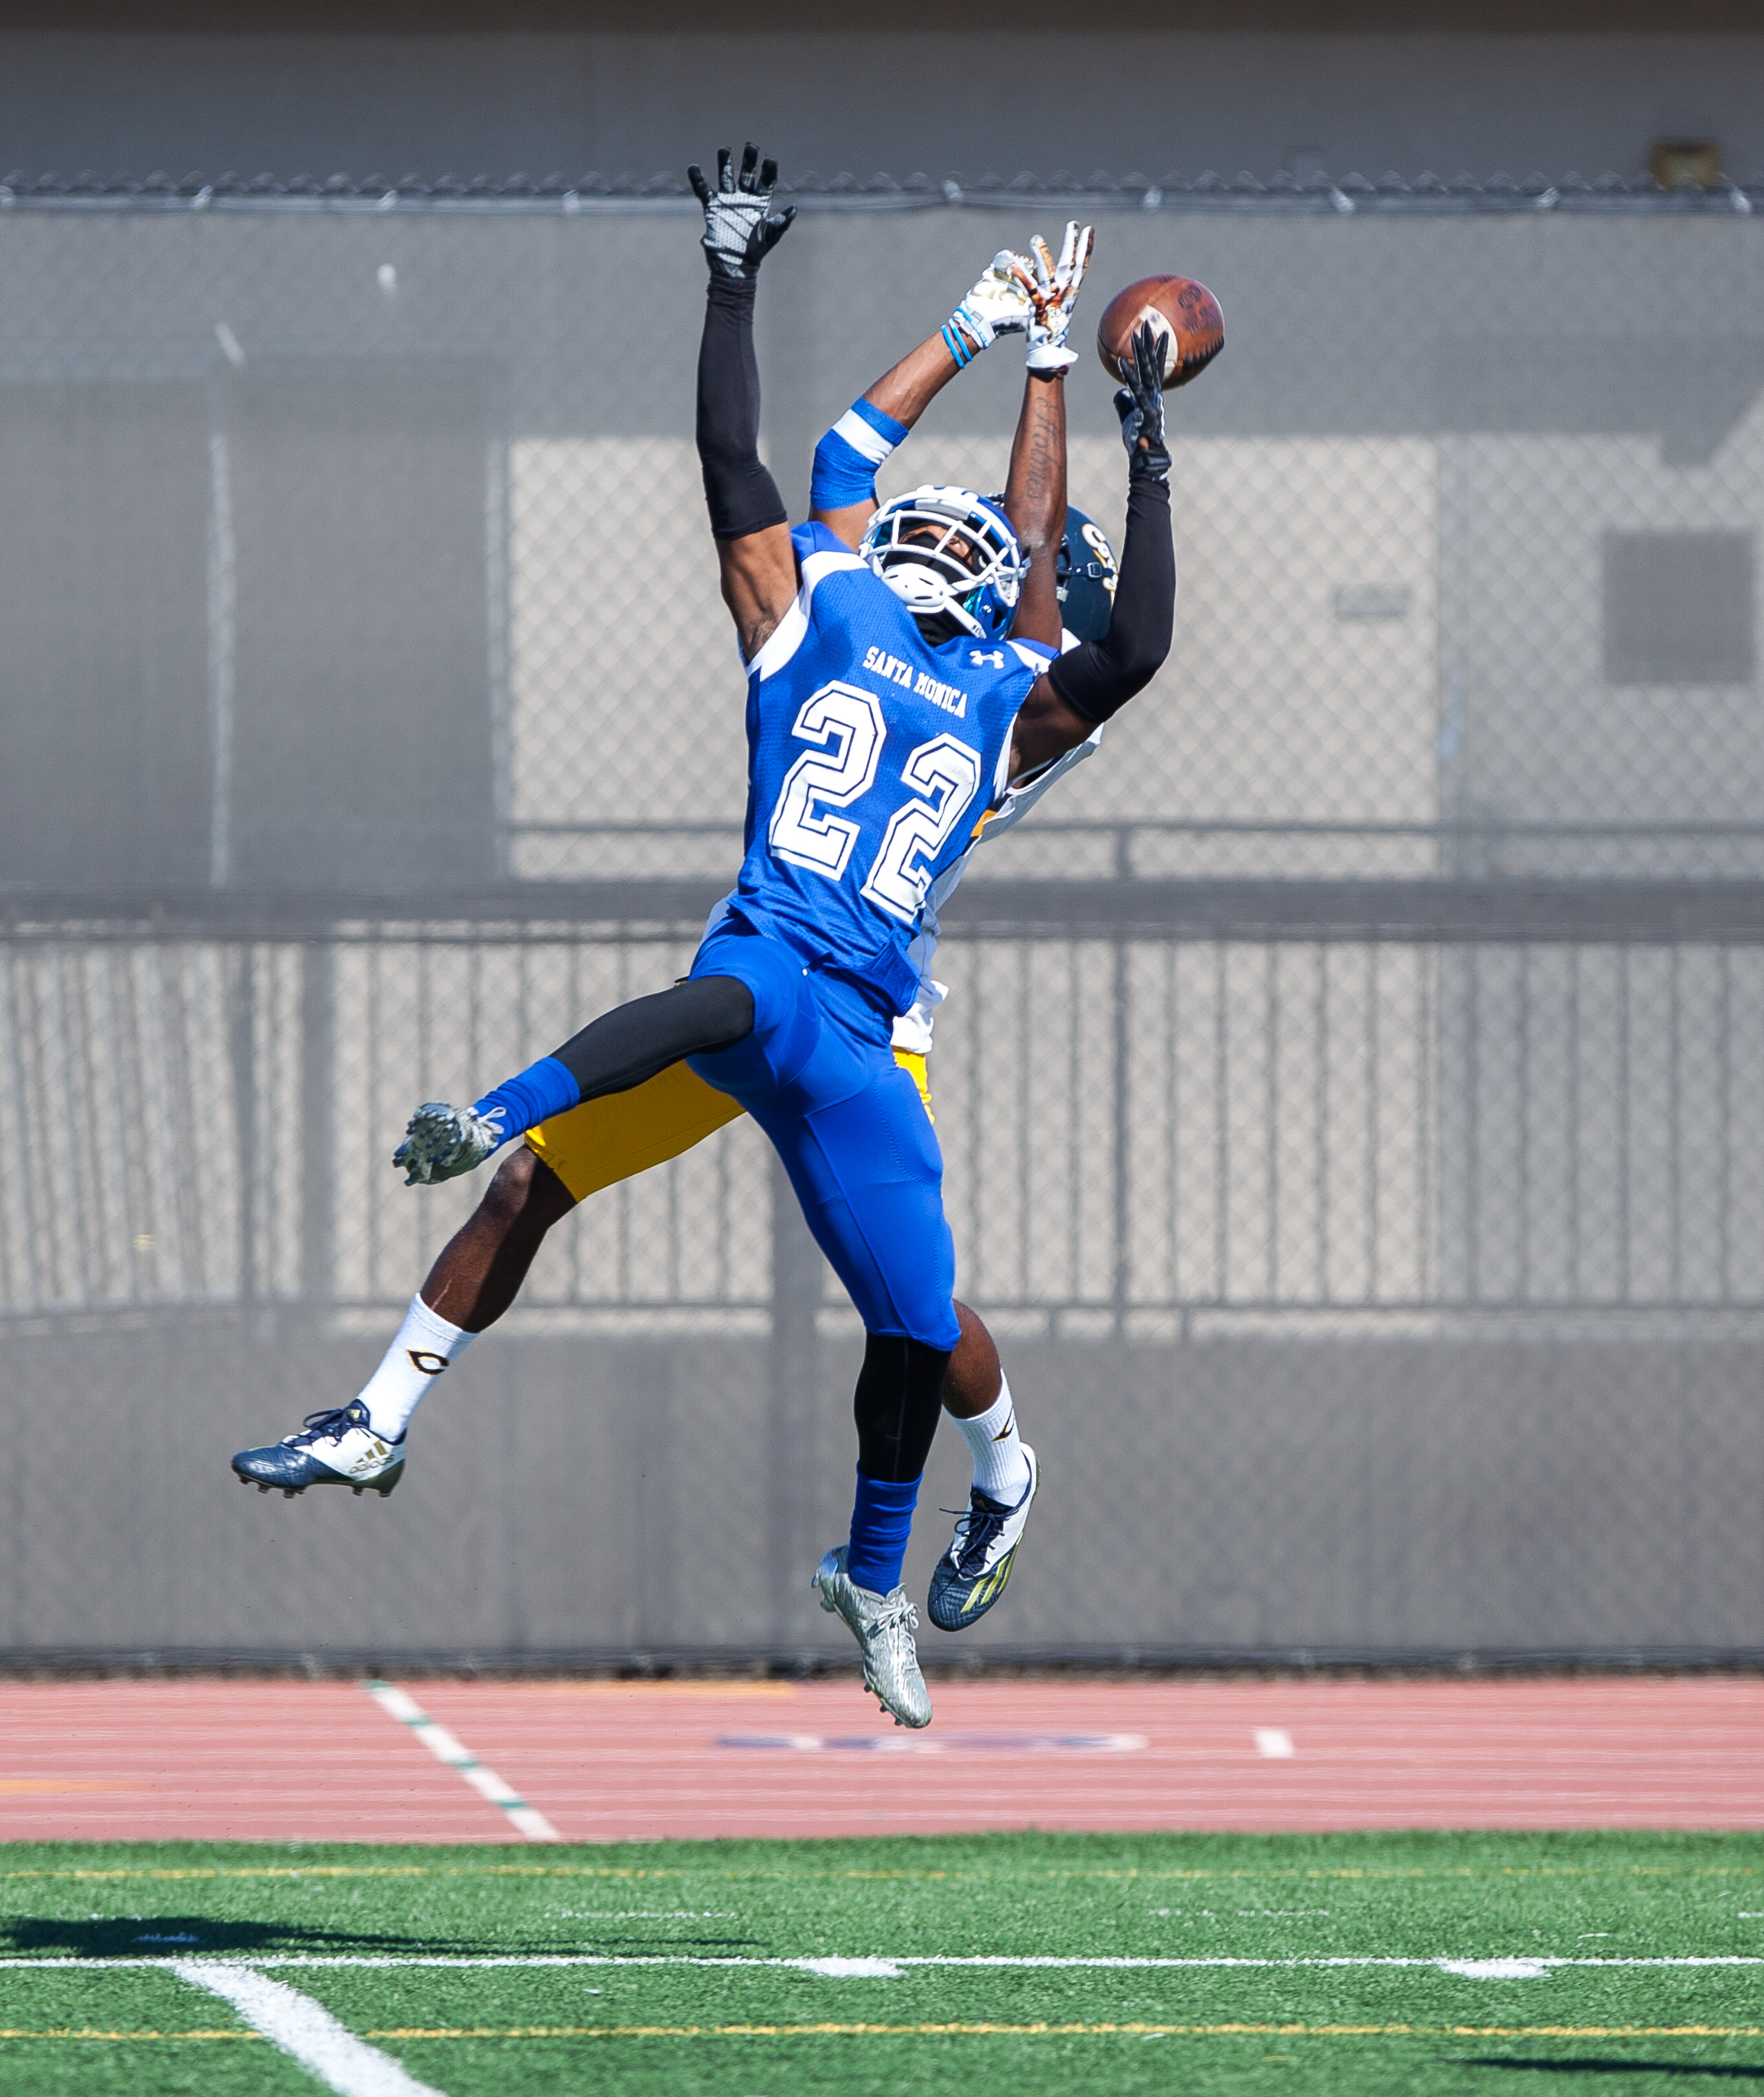  Richard Harbor III (22) of the Santa Monica College jumps up to perform the ball. College of the Canyons beat the Corsairs 48-7. The game was held at the Corsair Stadium at the Santa Monica College Main Campus in Santa Monica, California, on 4th of 